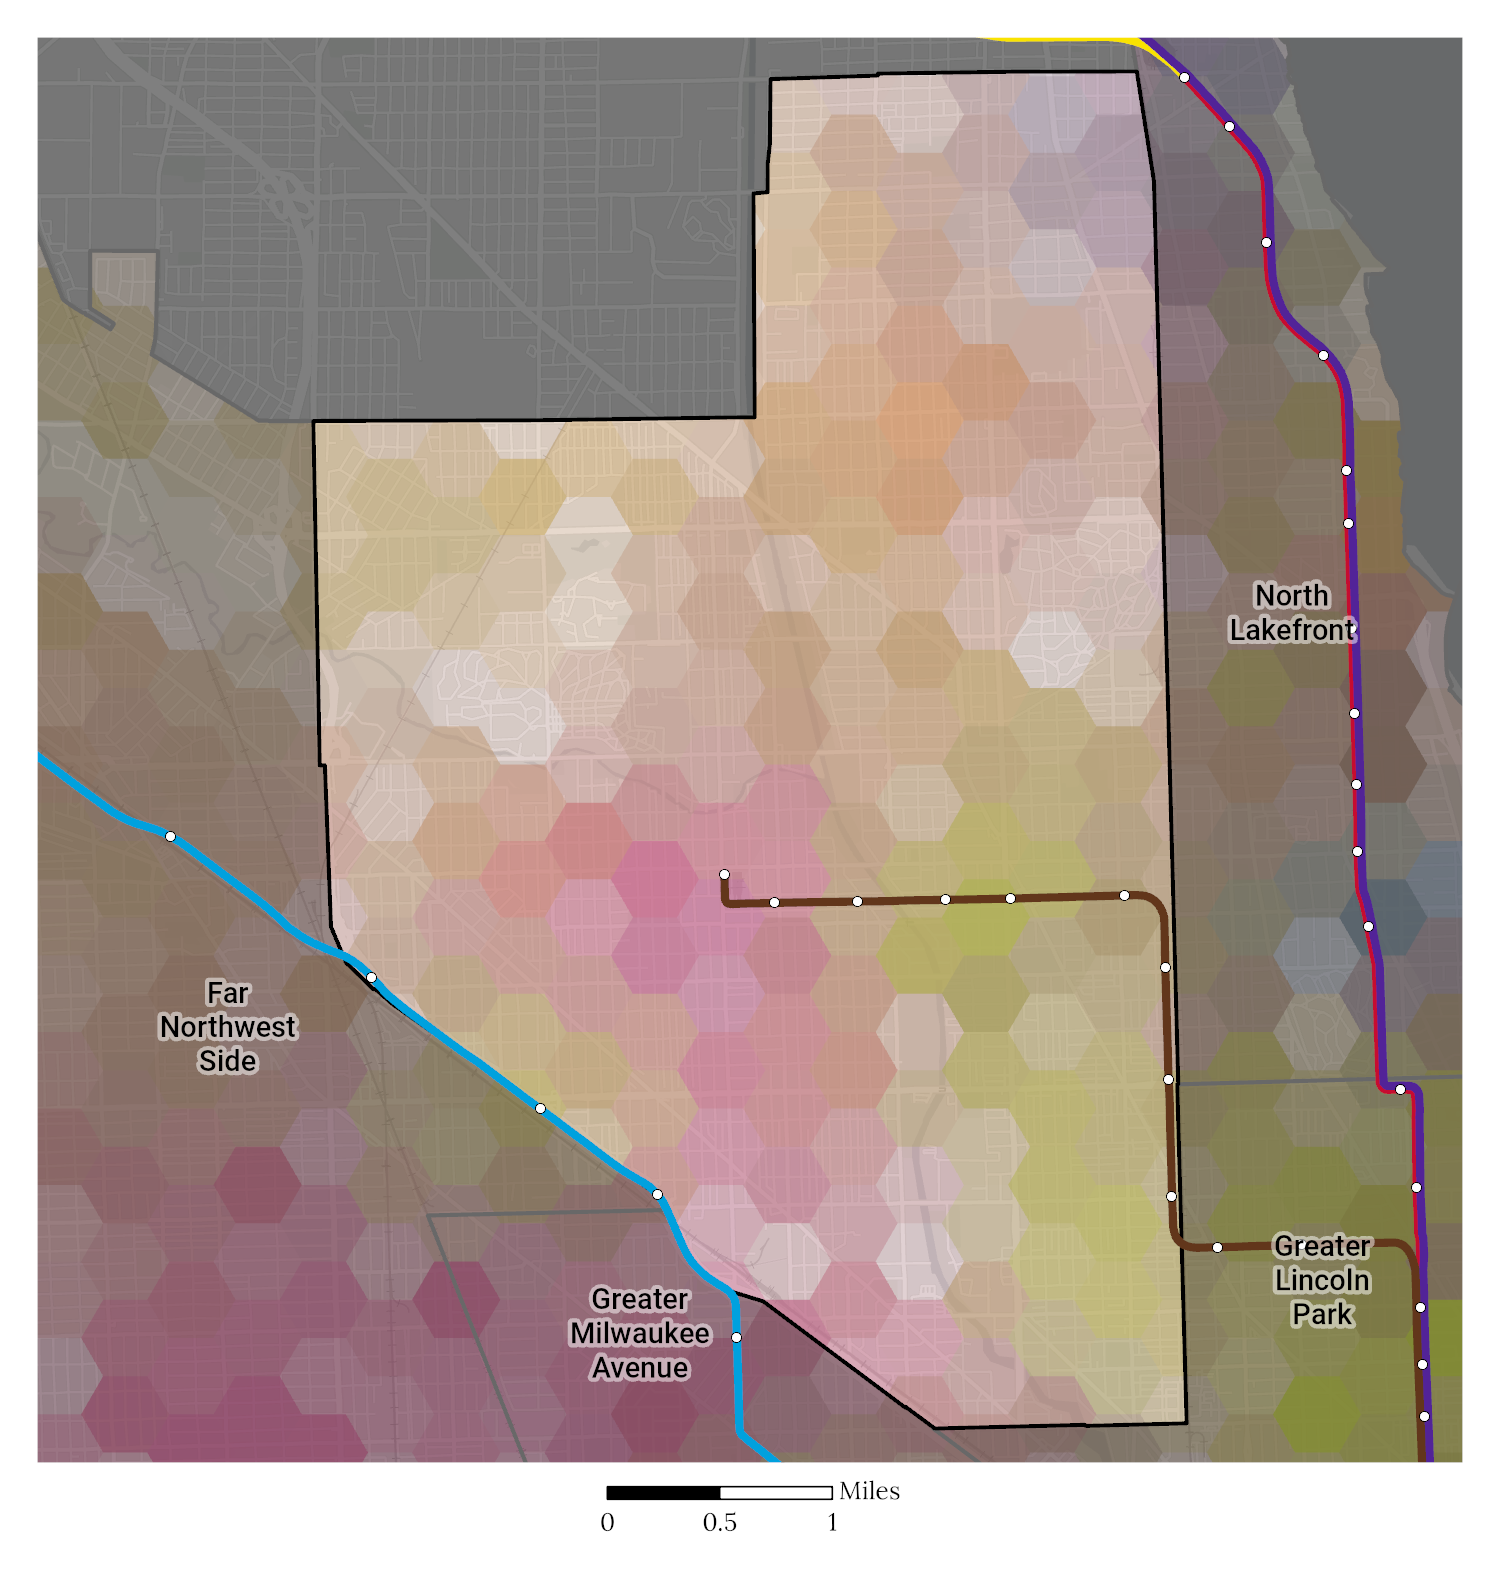 Racial and Ethnic composition map of Northwest Side